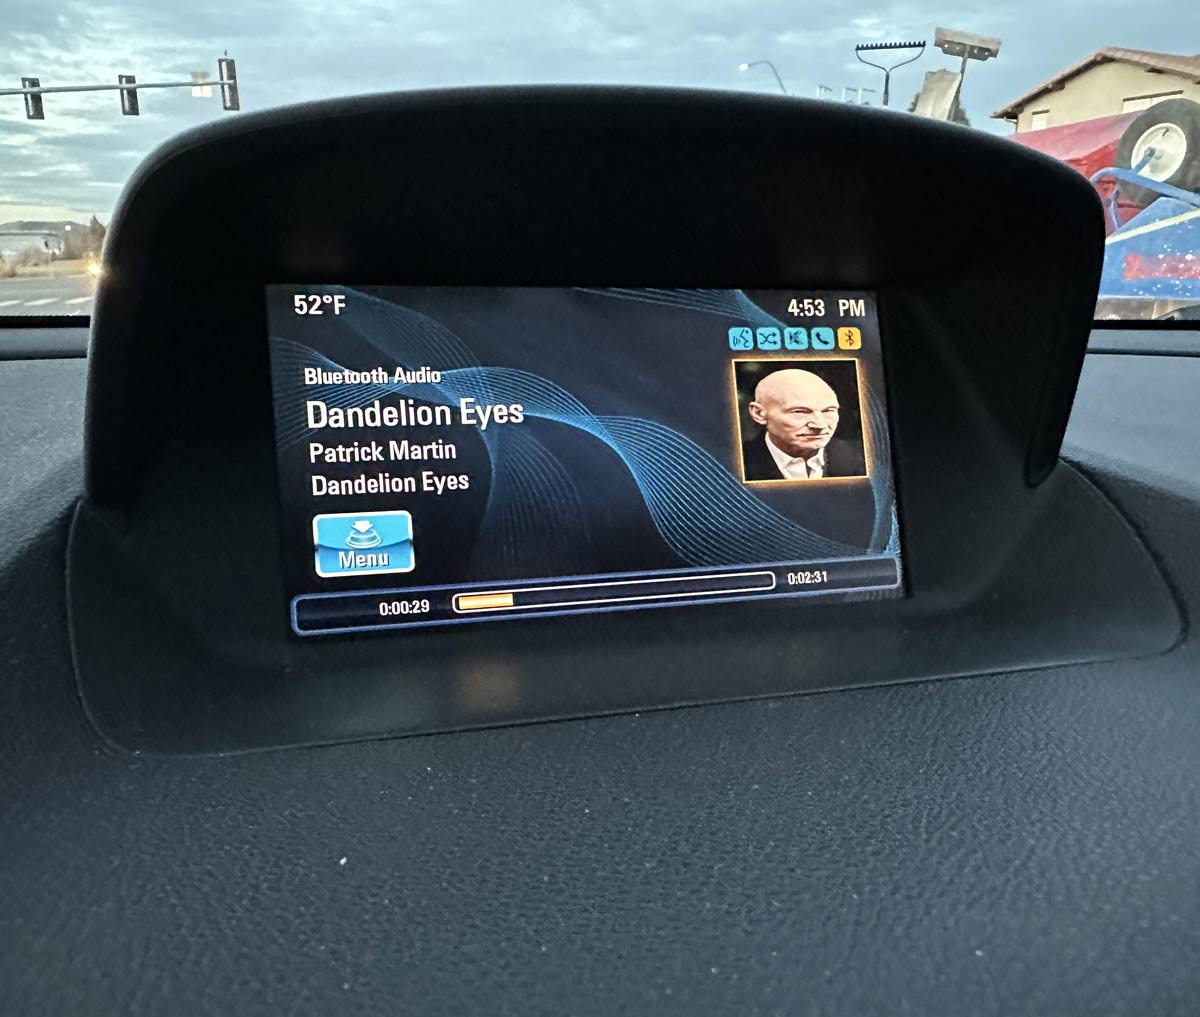 My car uses a picture of Patrick Stewart for any singer with the name Patrick